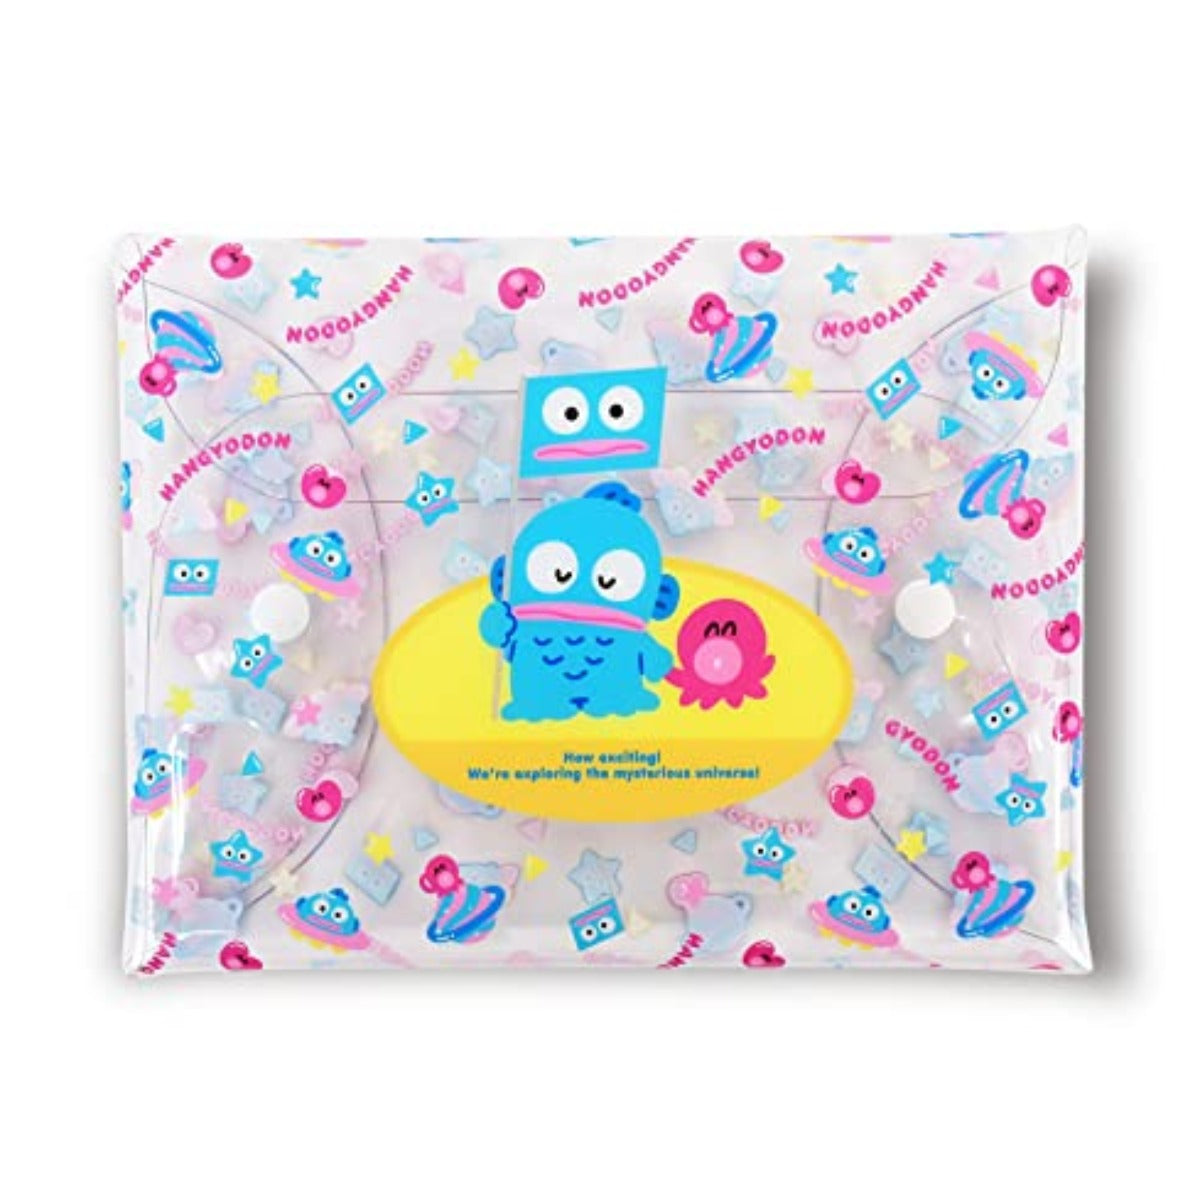 Clear Pouch - Sanrio Hangyodon with Flag